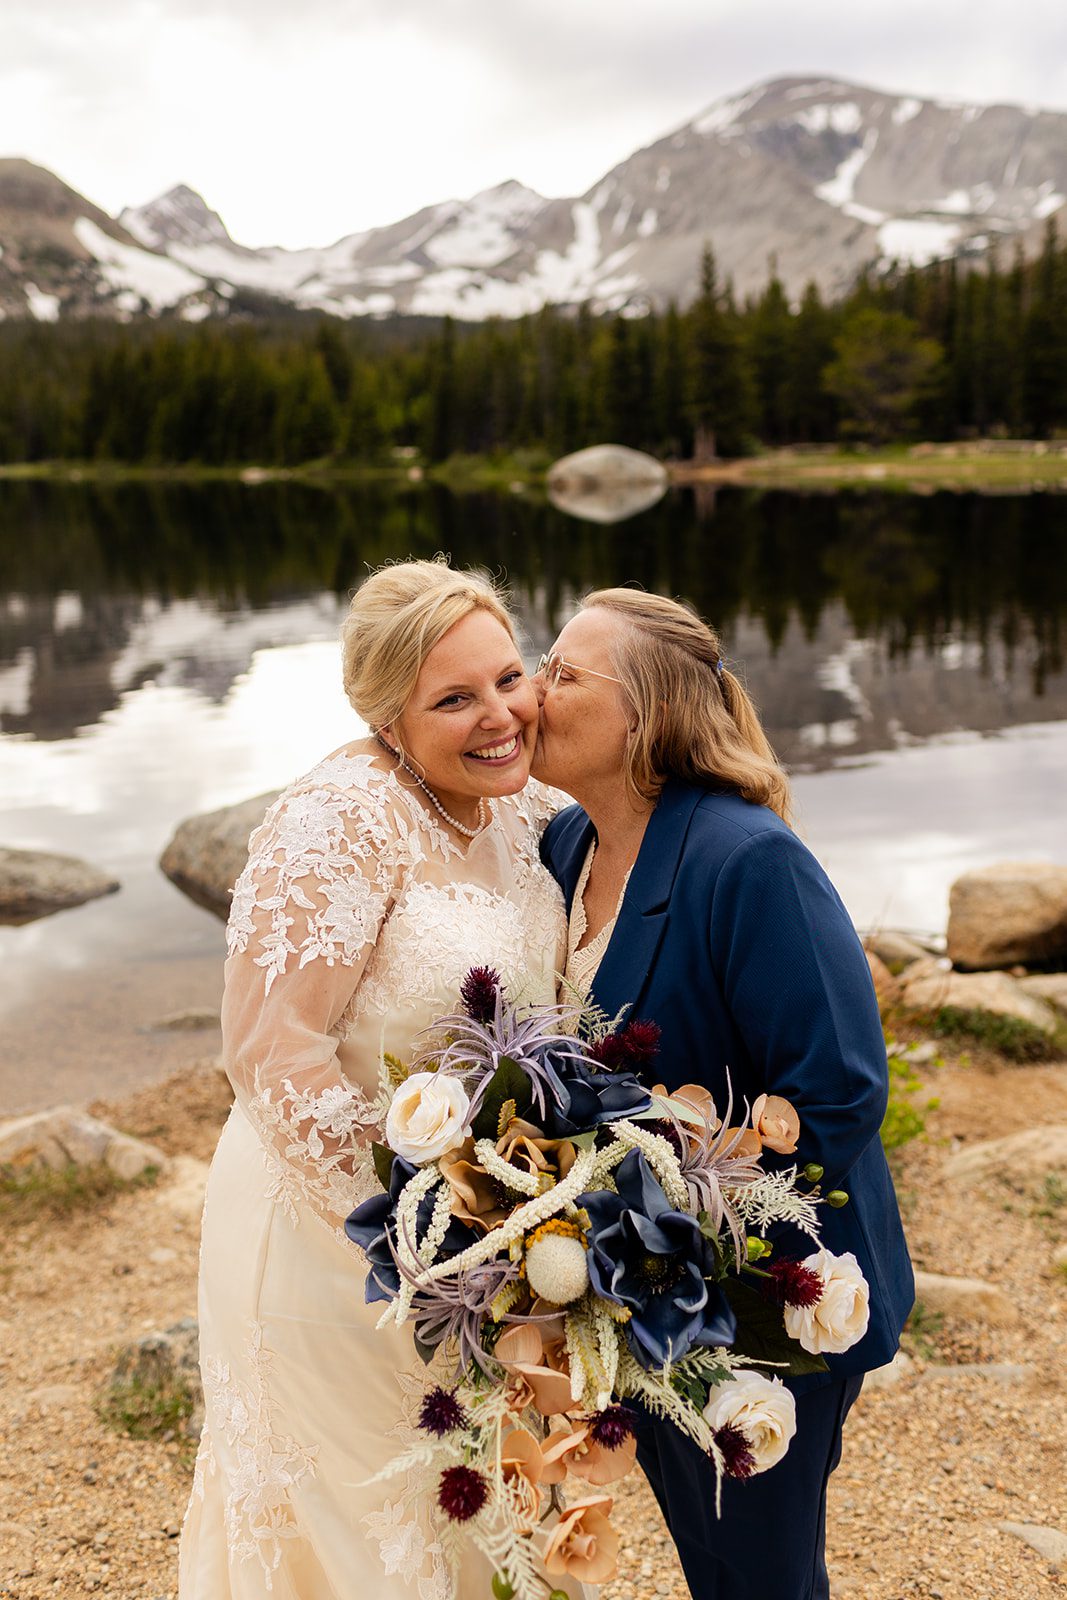 The bride and her mother at Brainard lake.